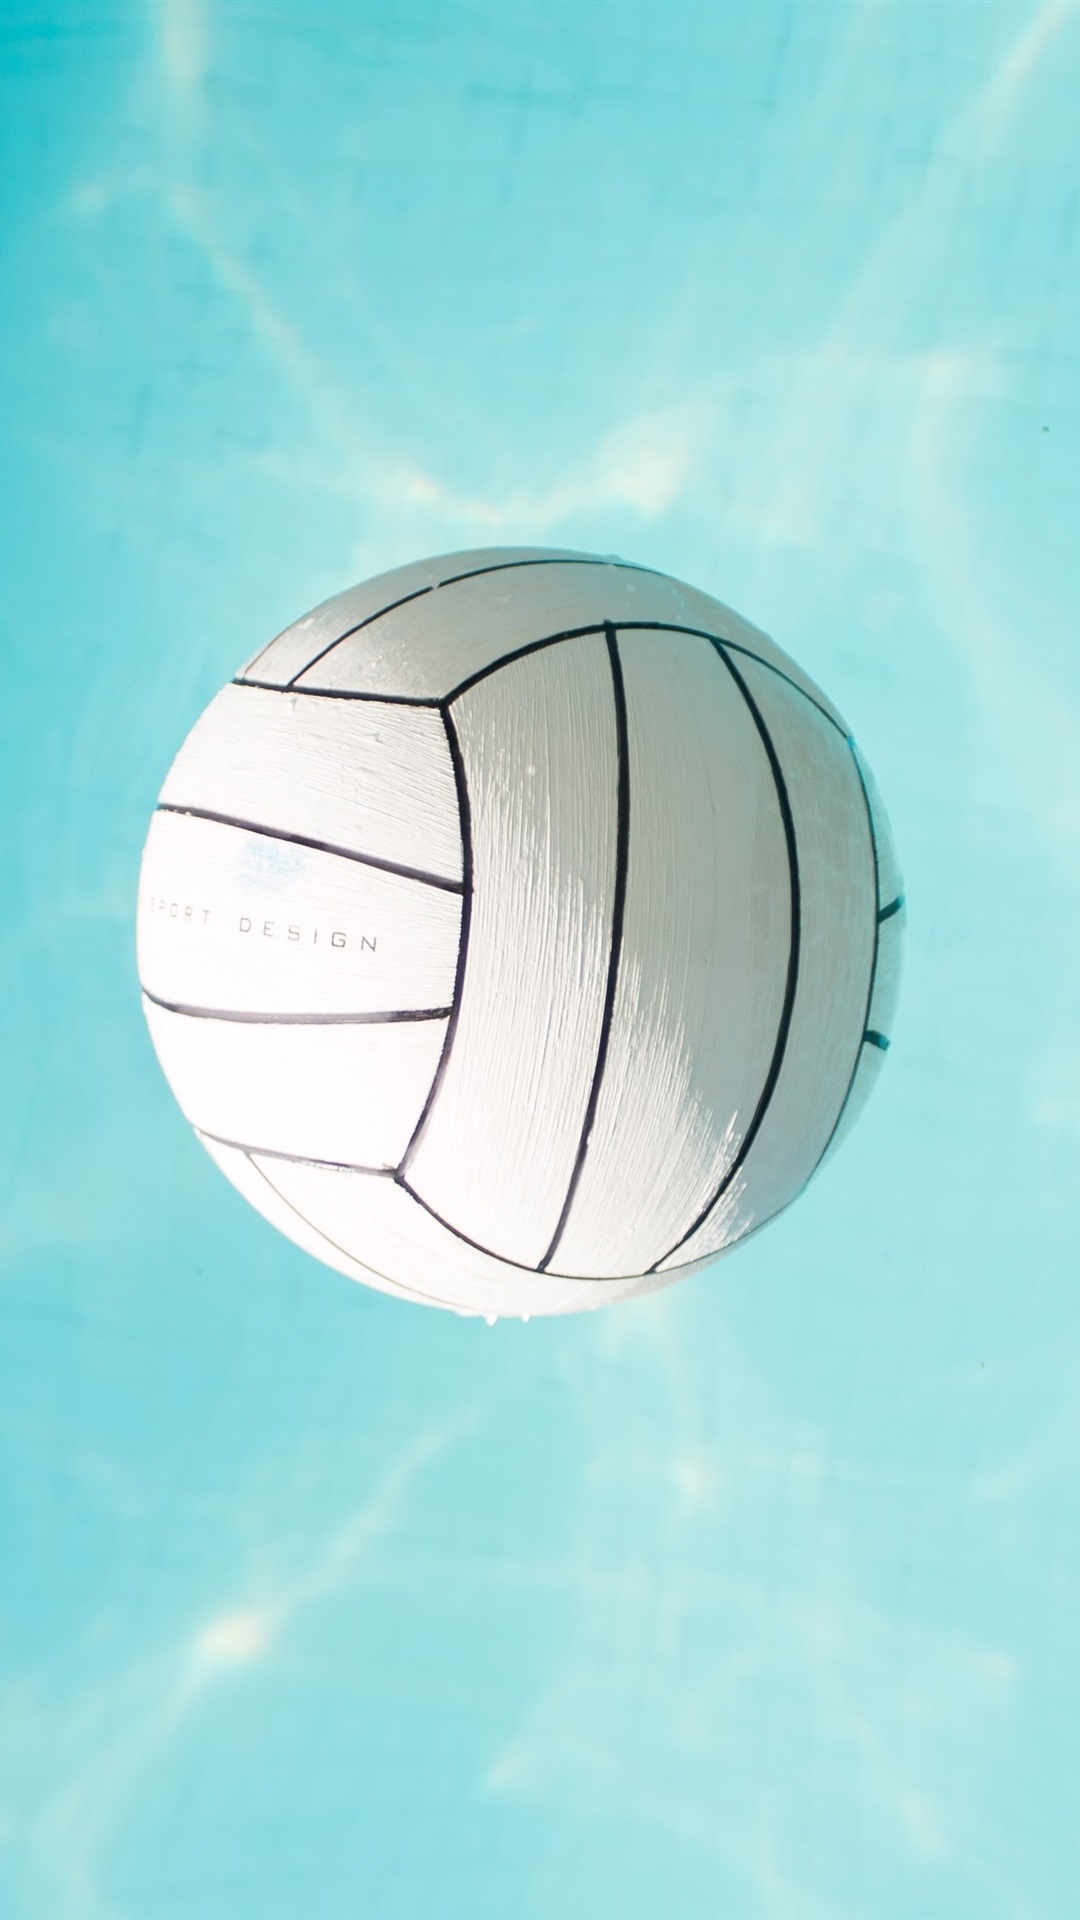 Iphone Wallpaper Volleyball, Blue Water - Water Polo Wallpaper For Iphone - HD Wallpaper 